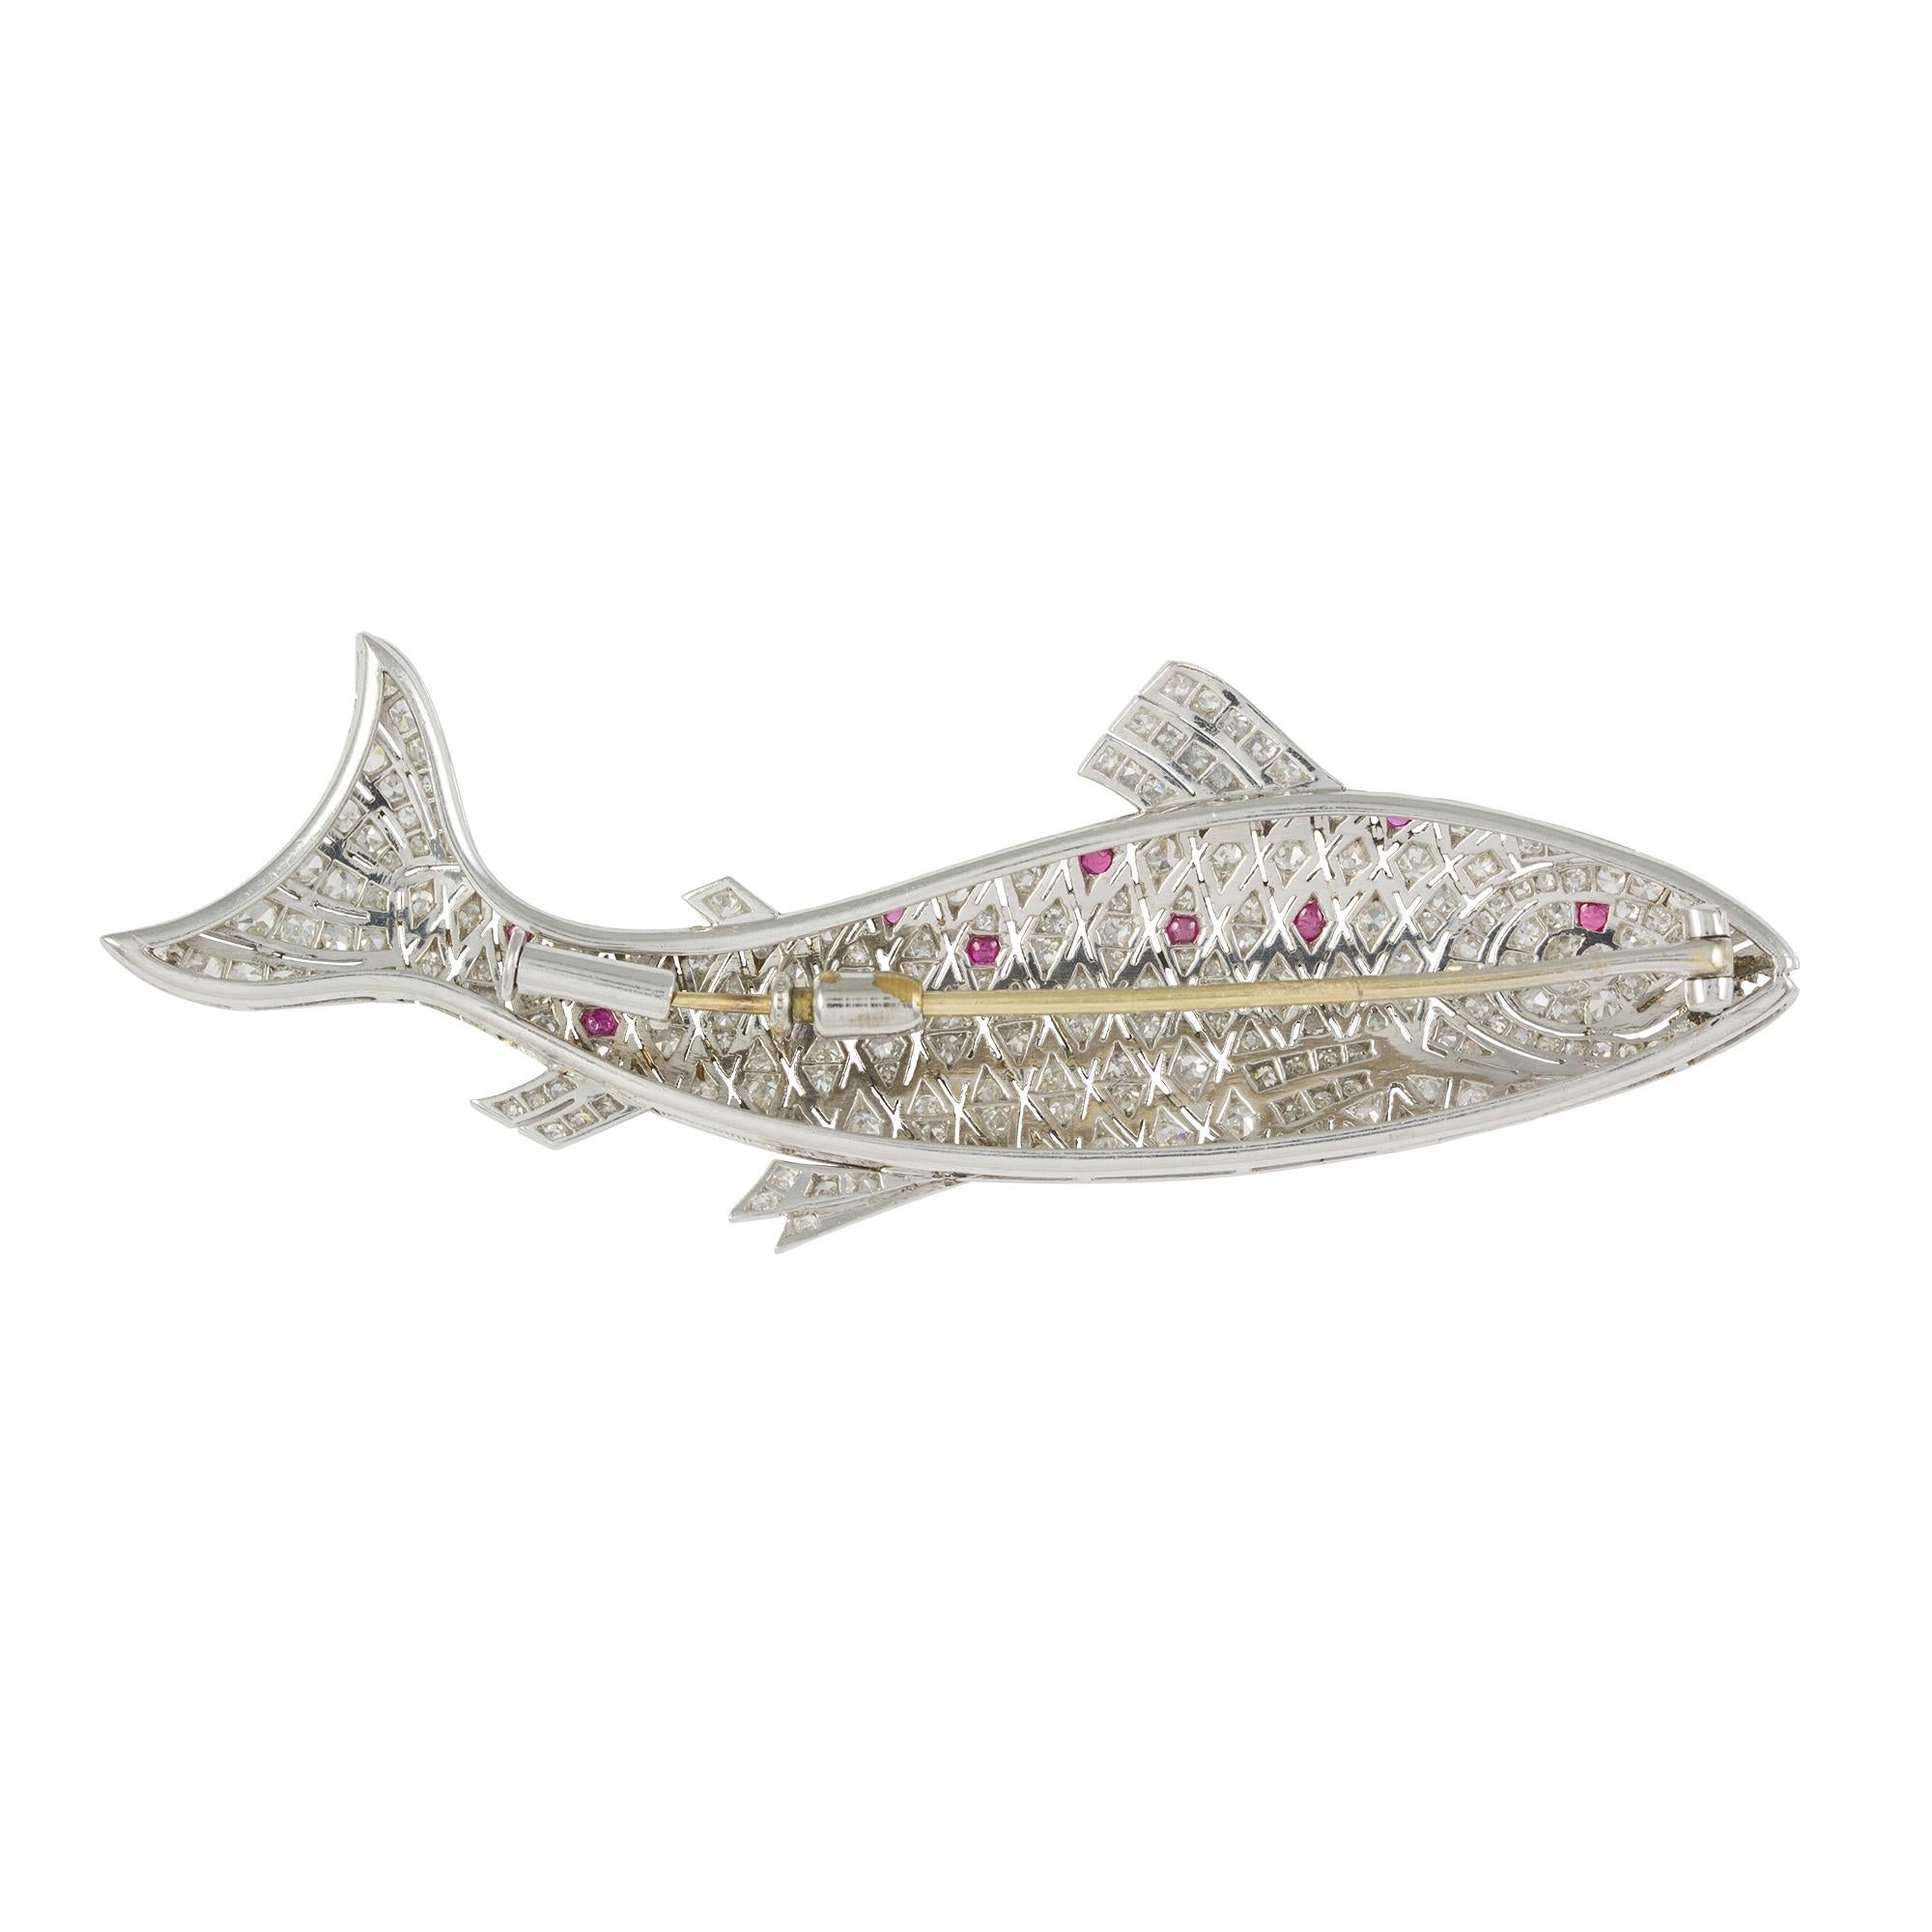 A ruby and diamond fish brooch, set with old brilliant-cut diamonds within pierced openwork and millegrain border forming the head, scales, tail and fins with cabochon rubies set along the back and eye, forming a body in motion, all to a platinum